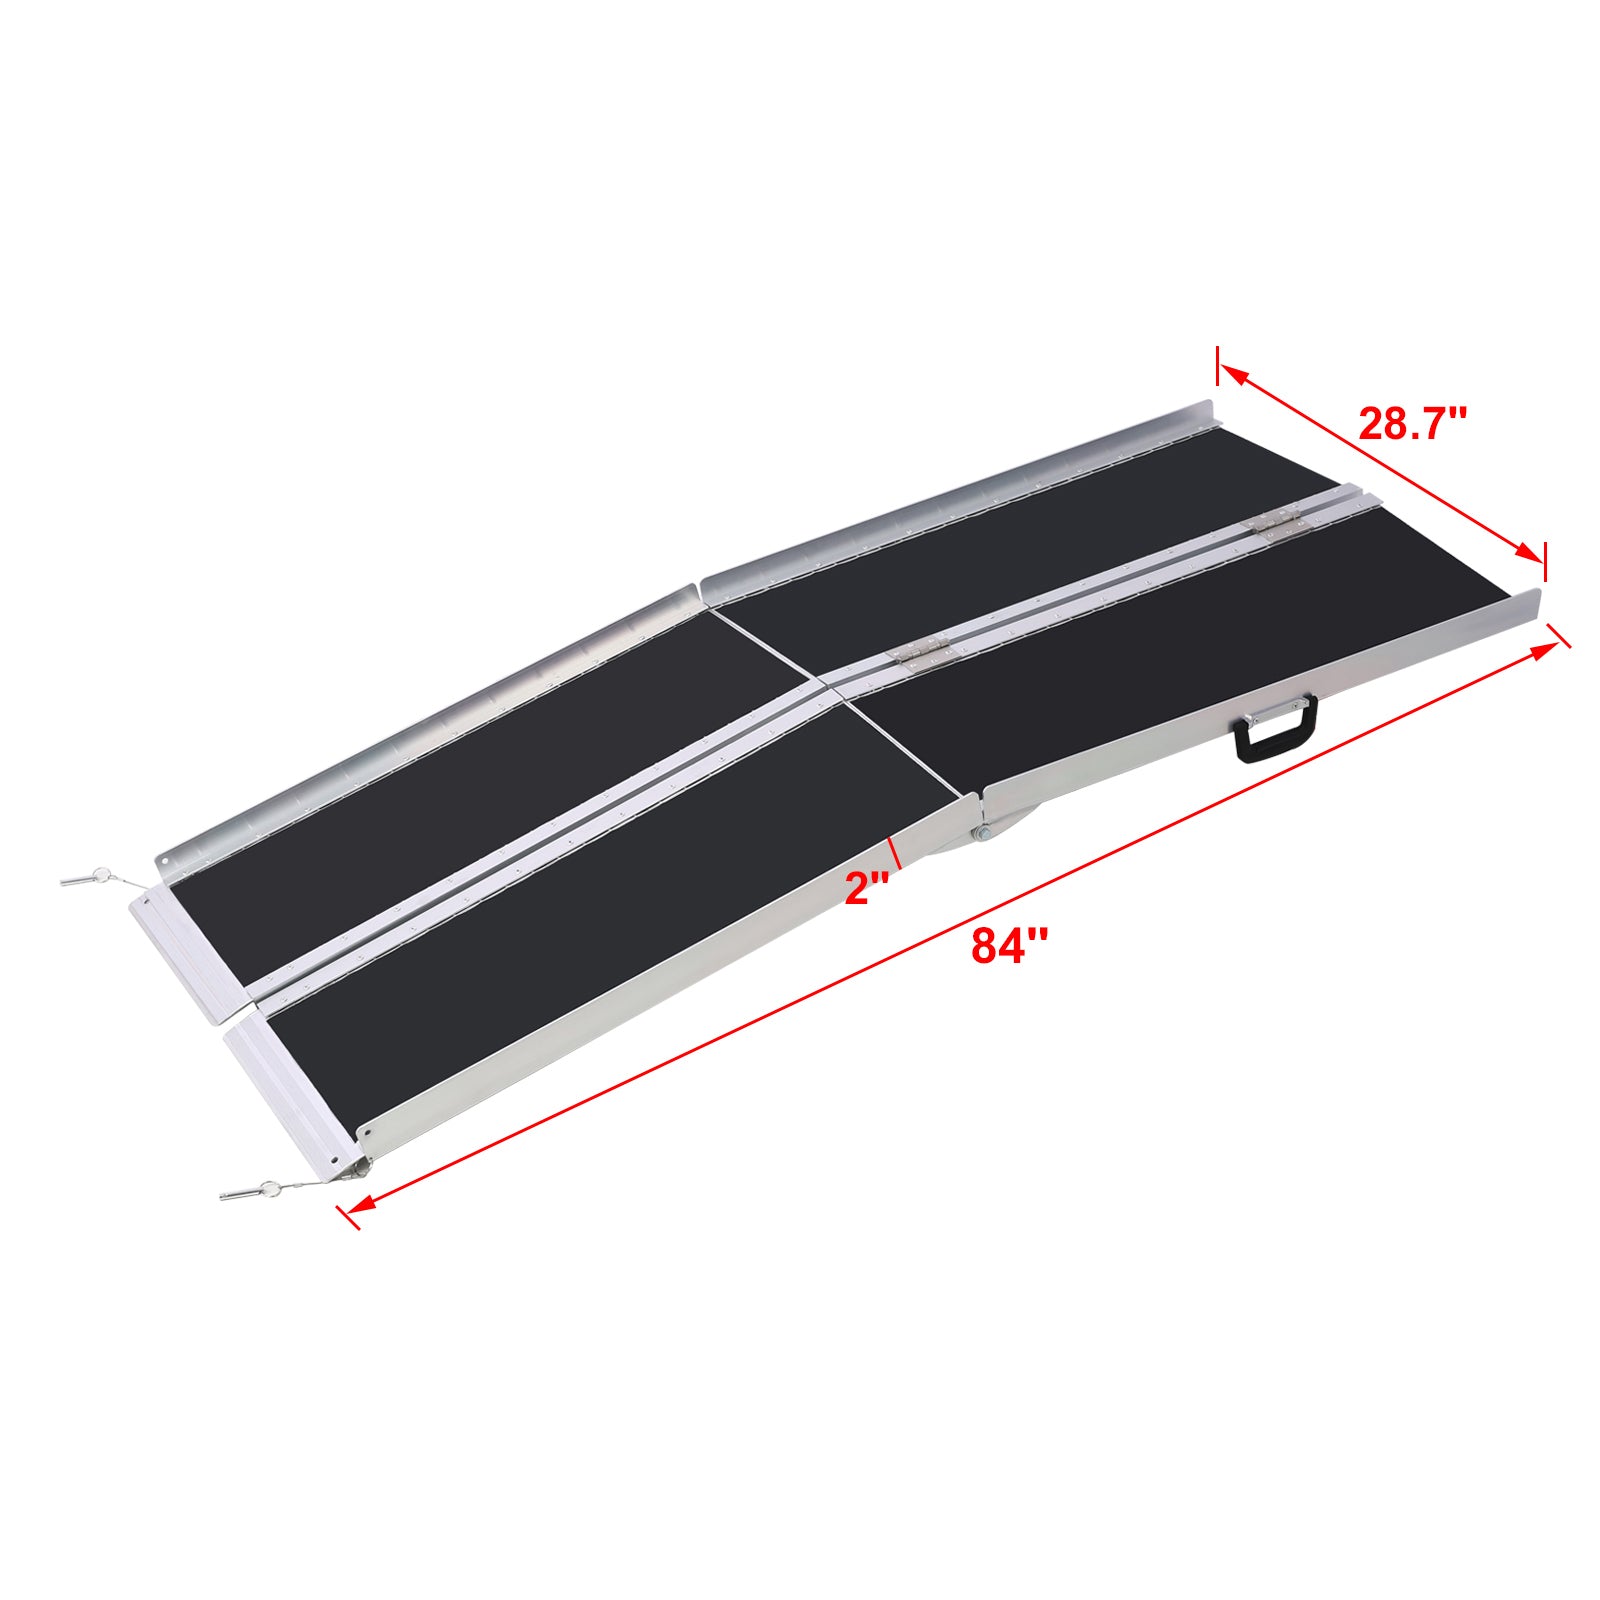 wheel chair ramp 7ft ,aluminium threhold ramp,Portable and Foldable, 600 Pound Capacity, Non-Skid Surface, Two Separate Pieces, for Home, Steps, Stairs, Doorways - Tonkn